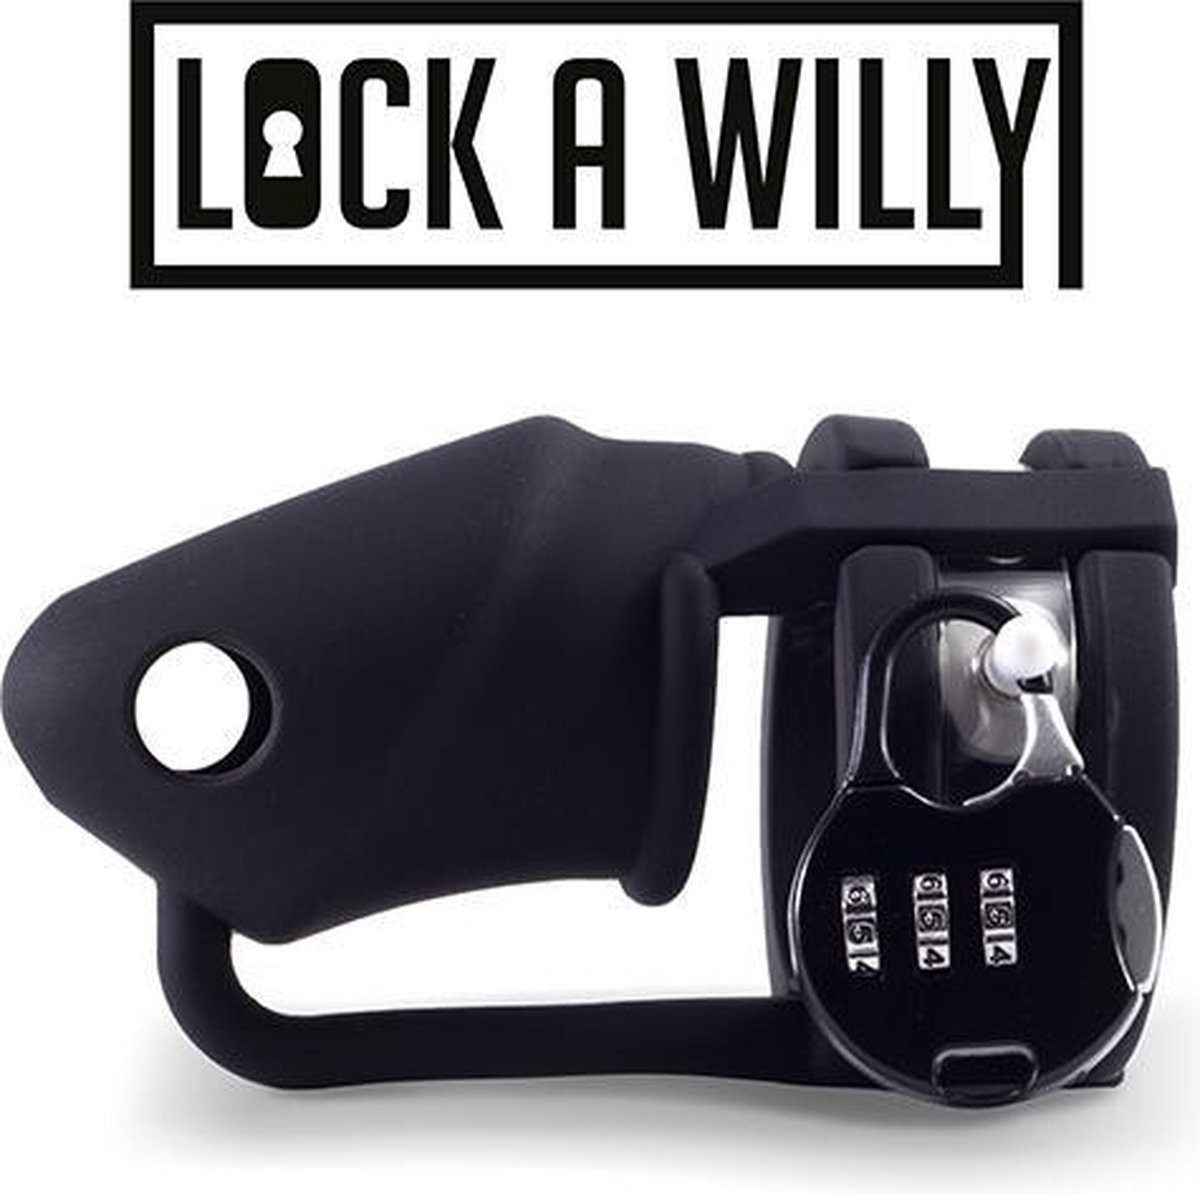 Lock-a-Willy - Peniskooi - Kuisheidskooi Lock a Willy - Cock cage - Chastity Cage - Siliconen Penis Kooi